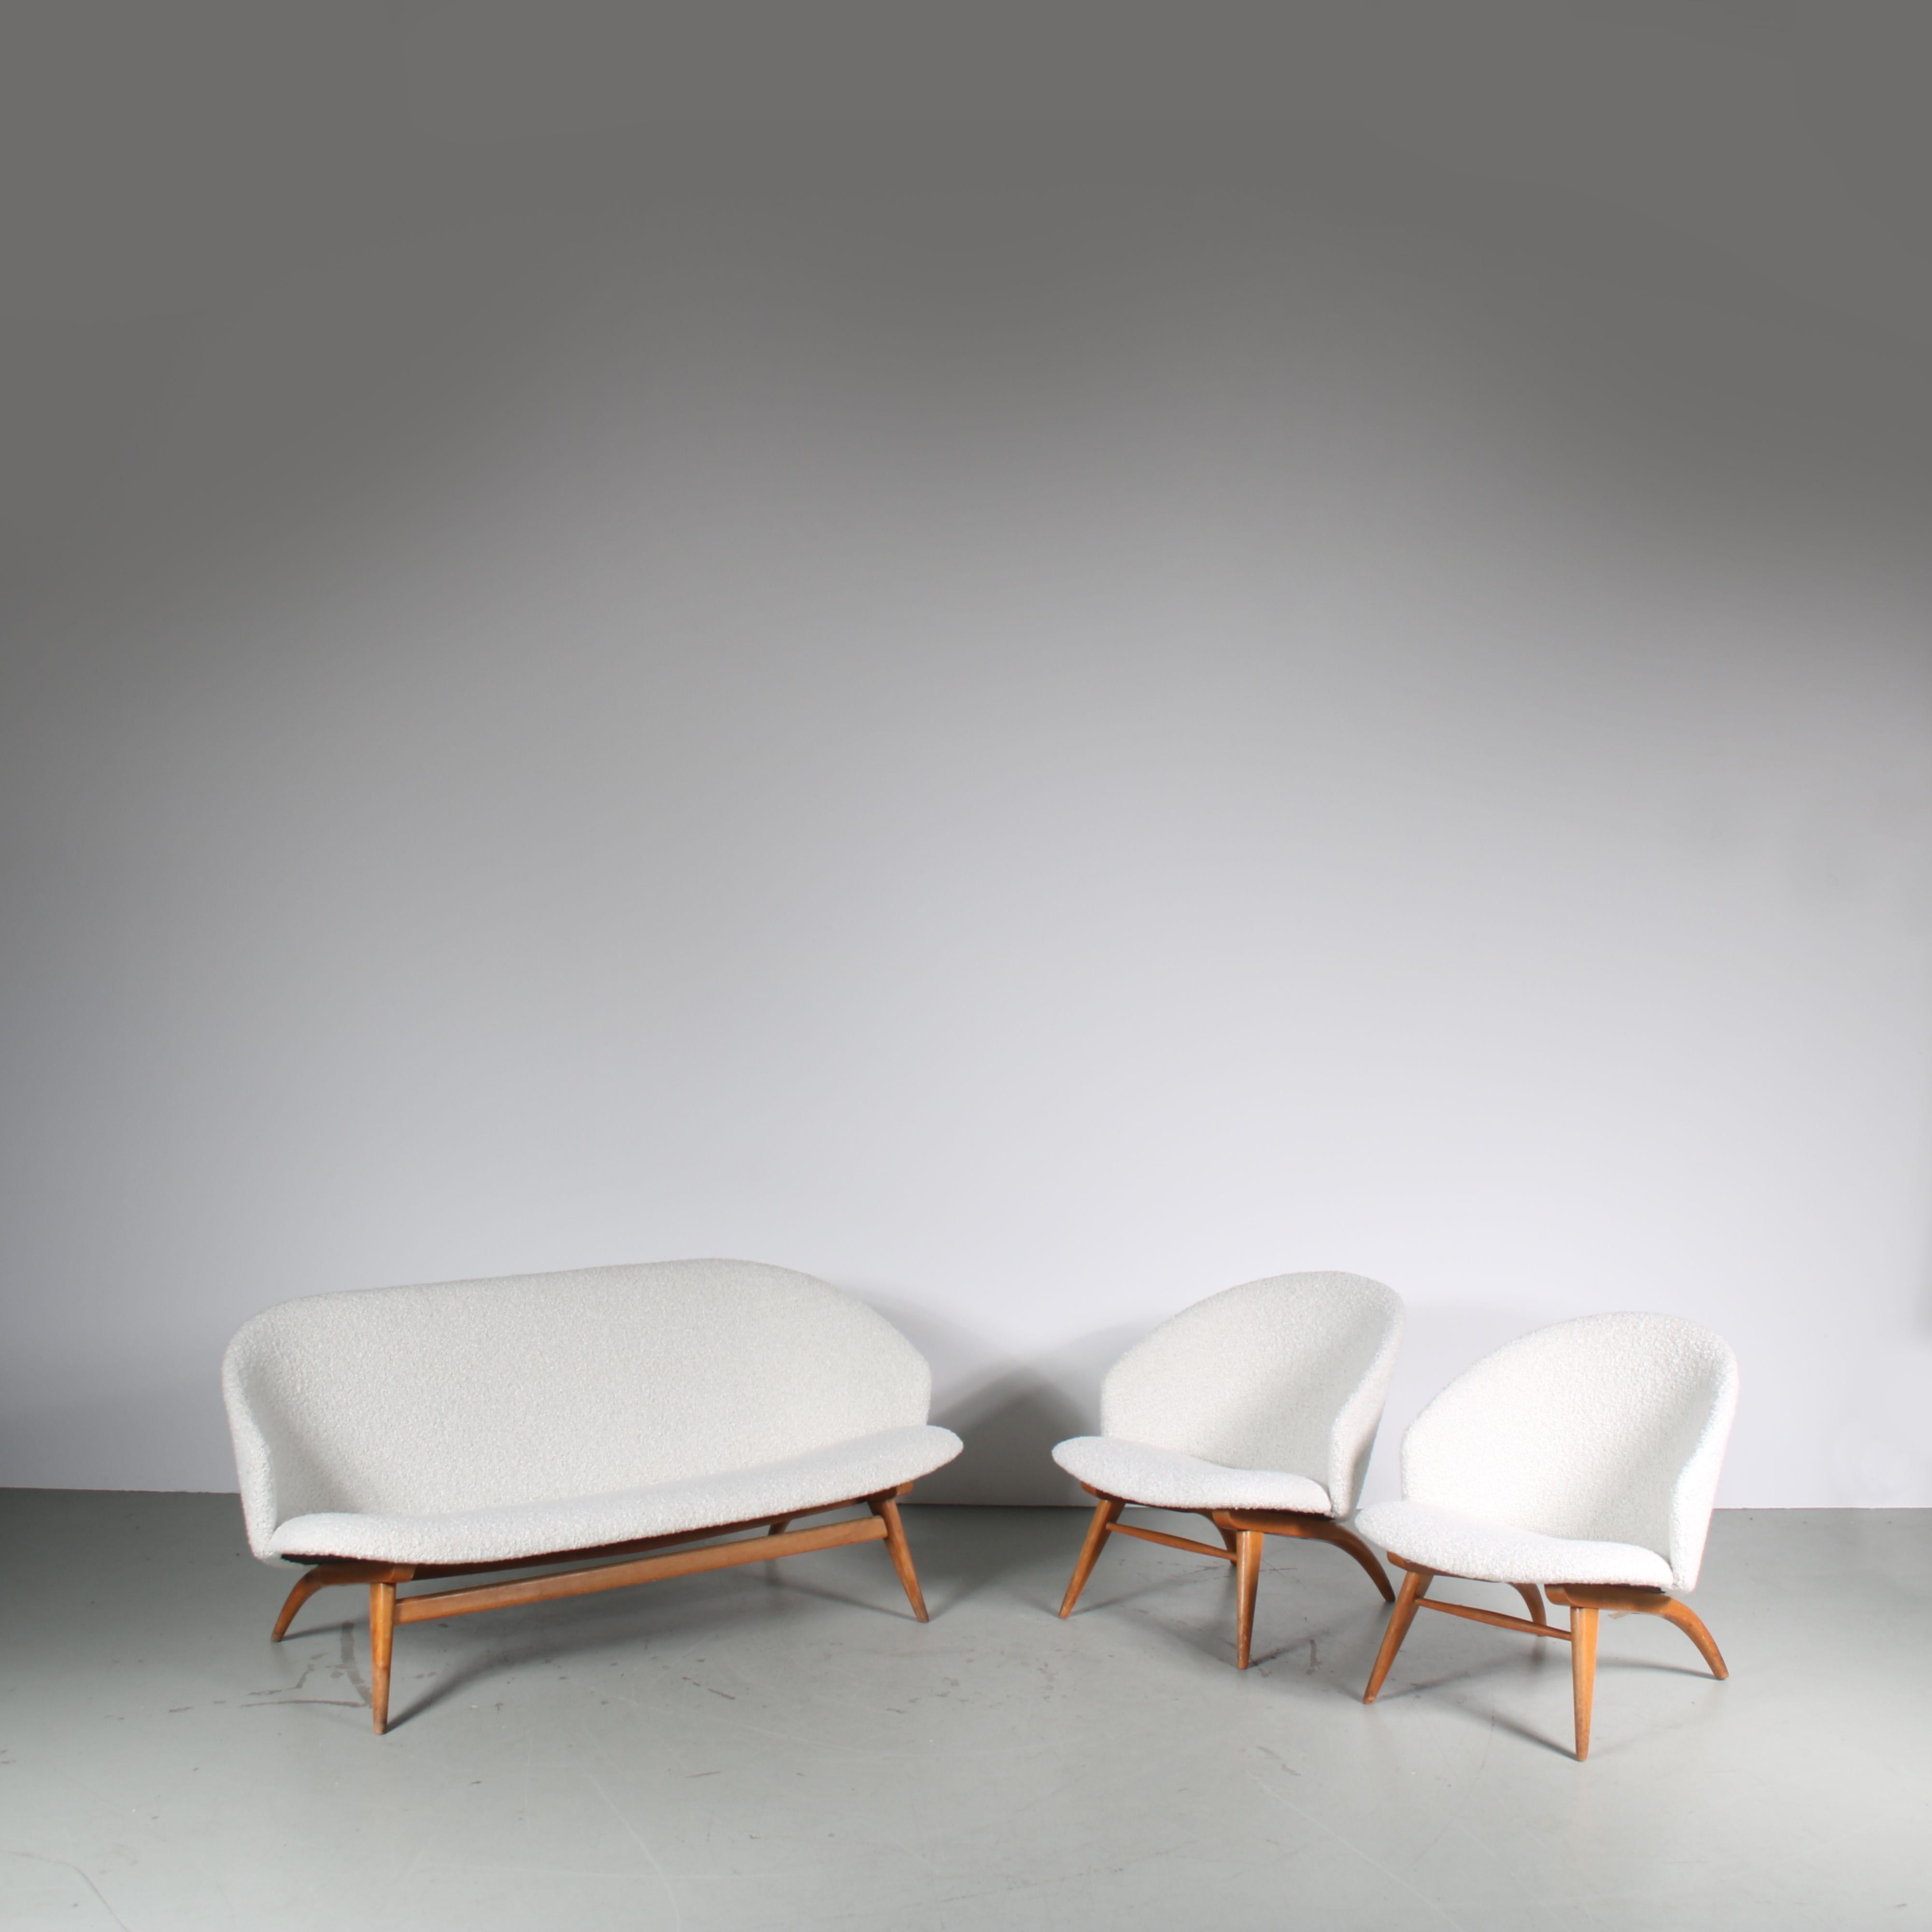 An eye-catching set of a 3-seater sofa and 2 easy chairs designed by Theo Ruth and manufactured by Artifort in the Netherlands around 1950.

Thess elegant pieces have beautiful quality, gently curved birch wooden frames with an interlocking